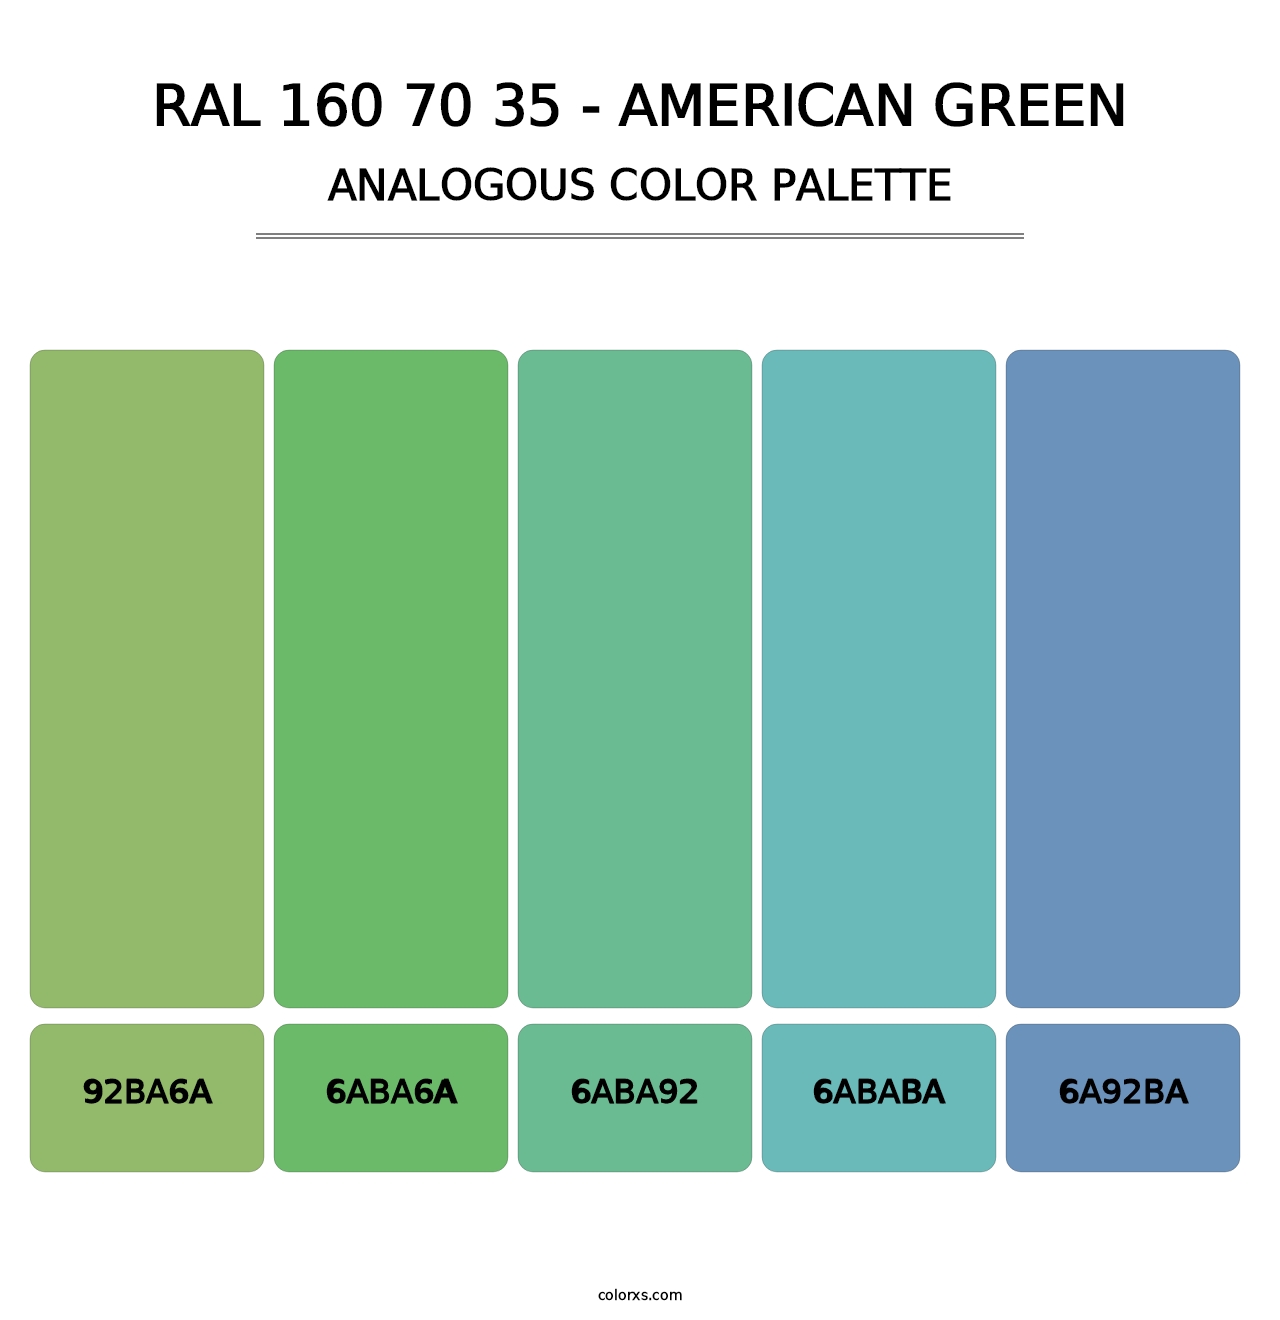 RAL 160 70 35 - American Green - Analogous Color Palette